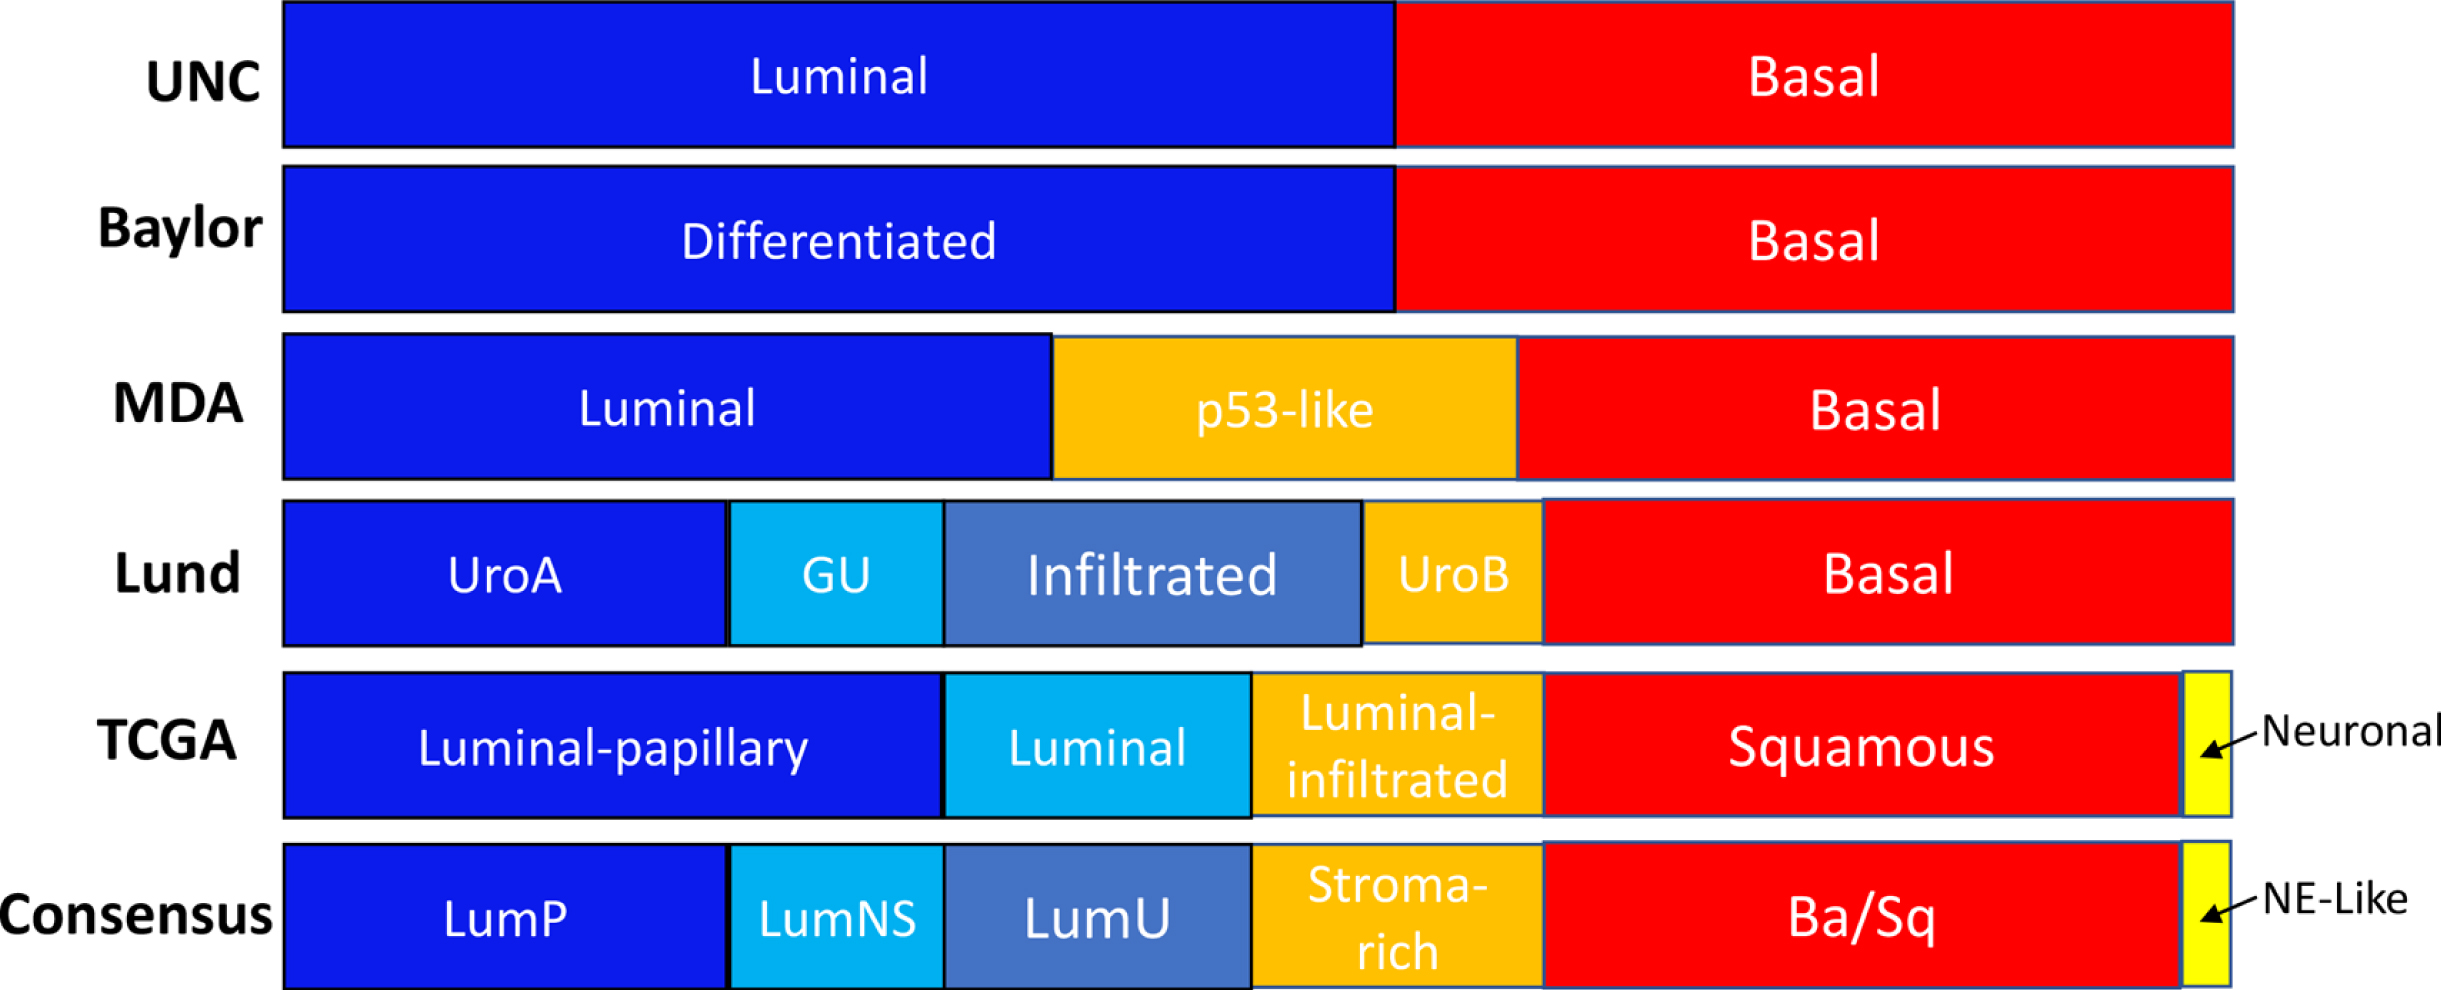 Different molecular classification systems of muscle-invasive bladder cancers. International consensus classification proposes 6 distinct molecular subtypes, which is based on a meta-analysis of 1750 cases from 18 datasets. Ba/Sq×basal/squamous; LumNS×luminal nonspecified; LumP×luminal papillary; LumU×luminal unstable; MDA×MD Anderson Cancer Center; NE-like×neuroendocrine-like; TCGA×the Cancer Genome Atlas; UNC×University of North Carolina. Modified with permission from Kamoun et al. Eur Urol. 2020;77(4):420-433.